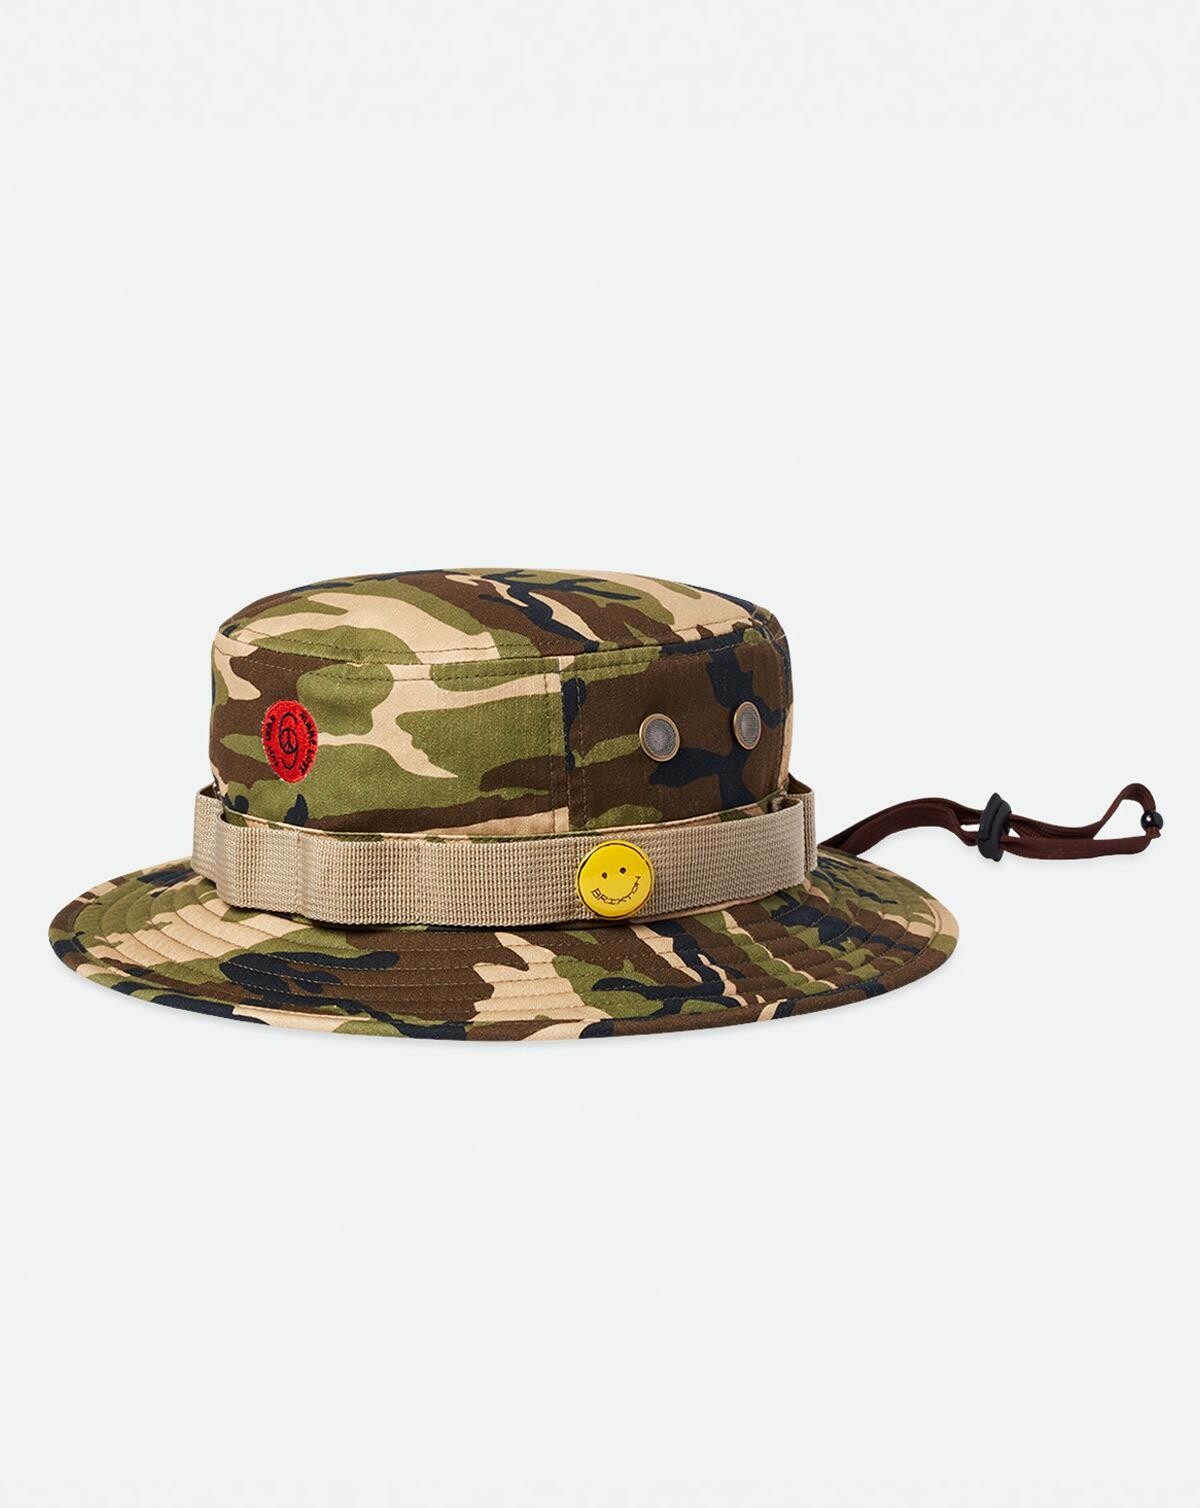 Brixton Love Packable Bucket Hat (Camouflage, S/M)